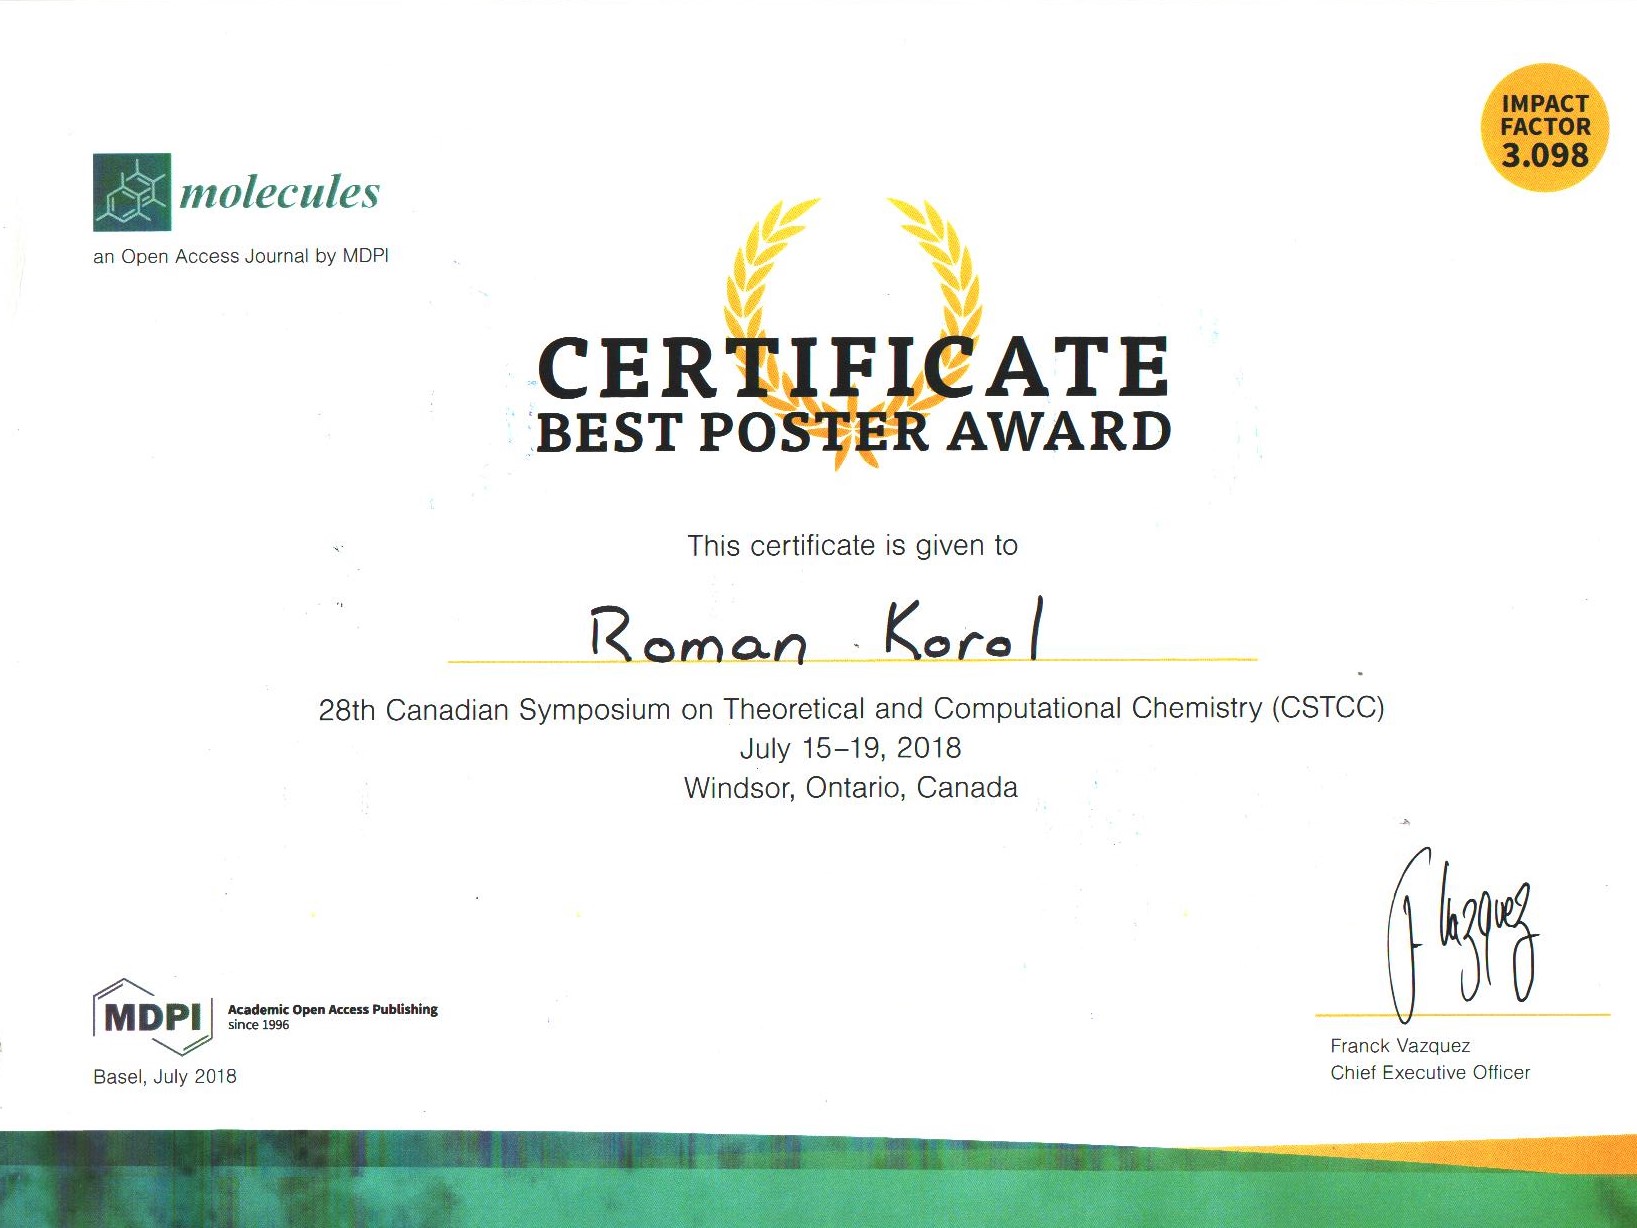 Certificate for the best poster award